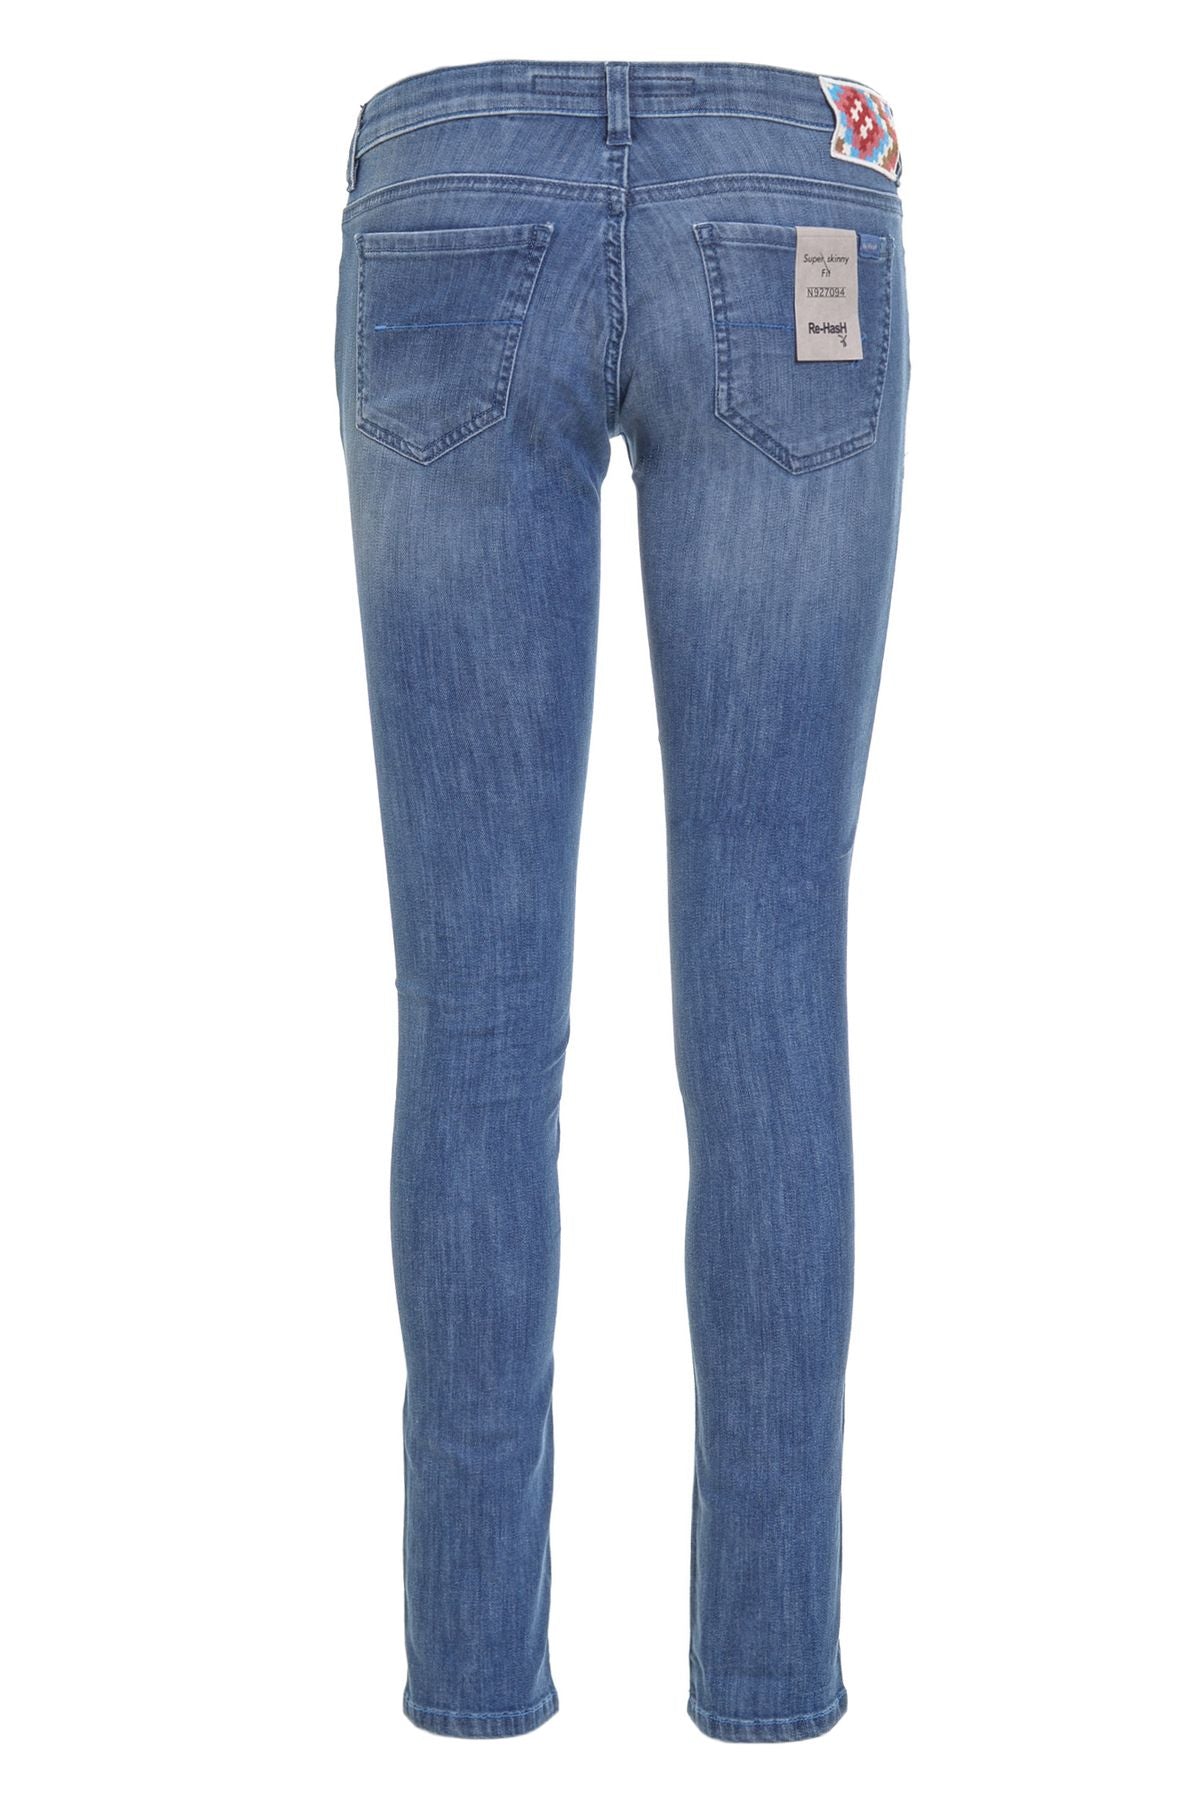 Re-HasH Jeans Autunno/Inverno p265holly2558